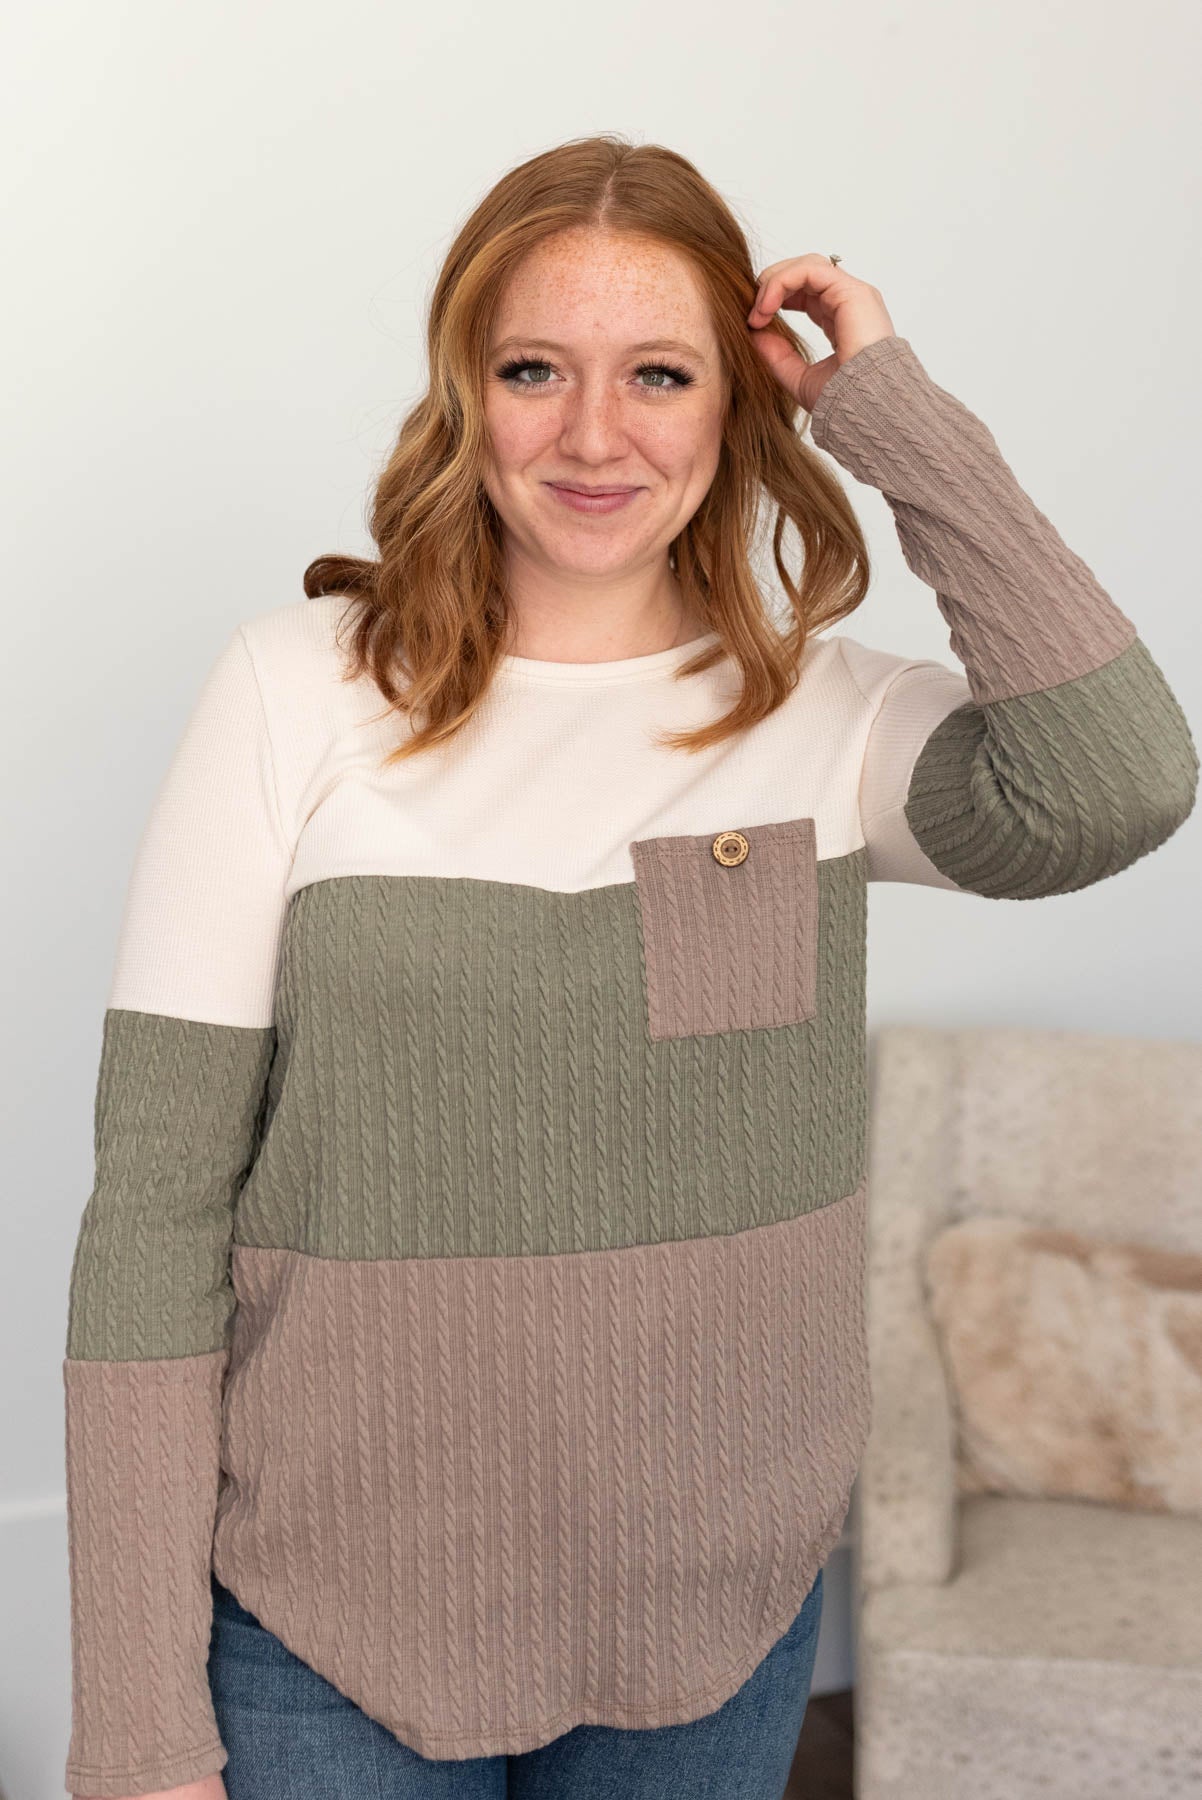 Olive pocketed cable knit top with cream and tan color blocks